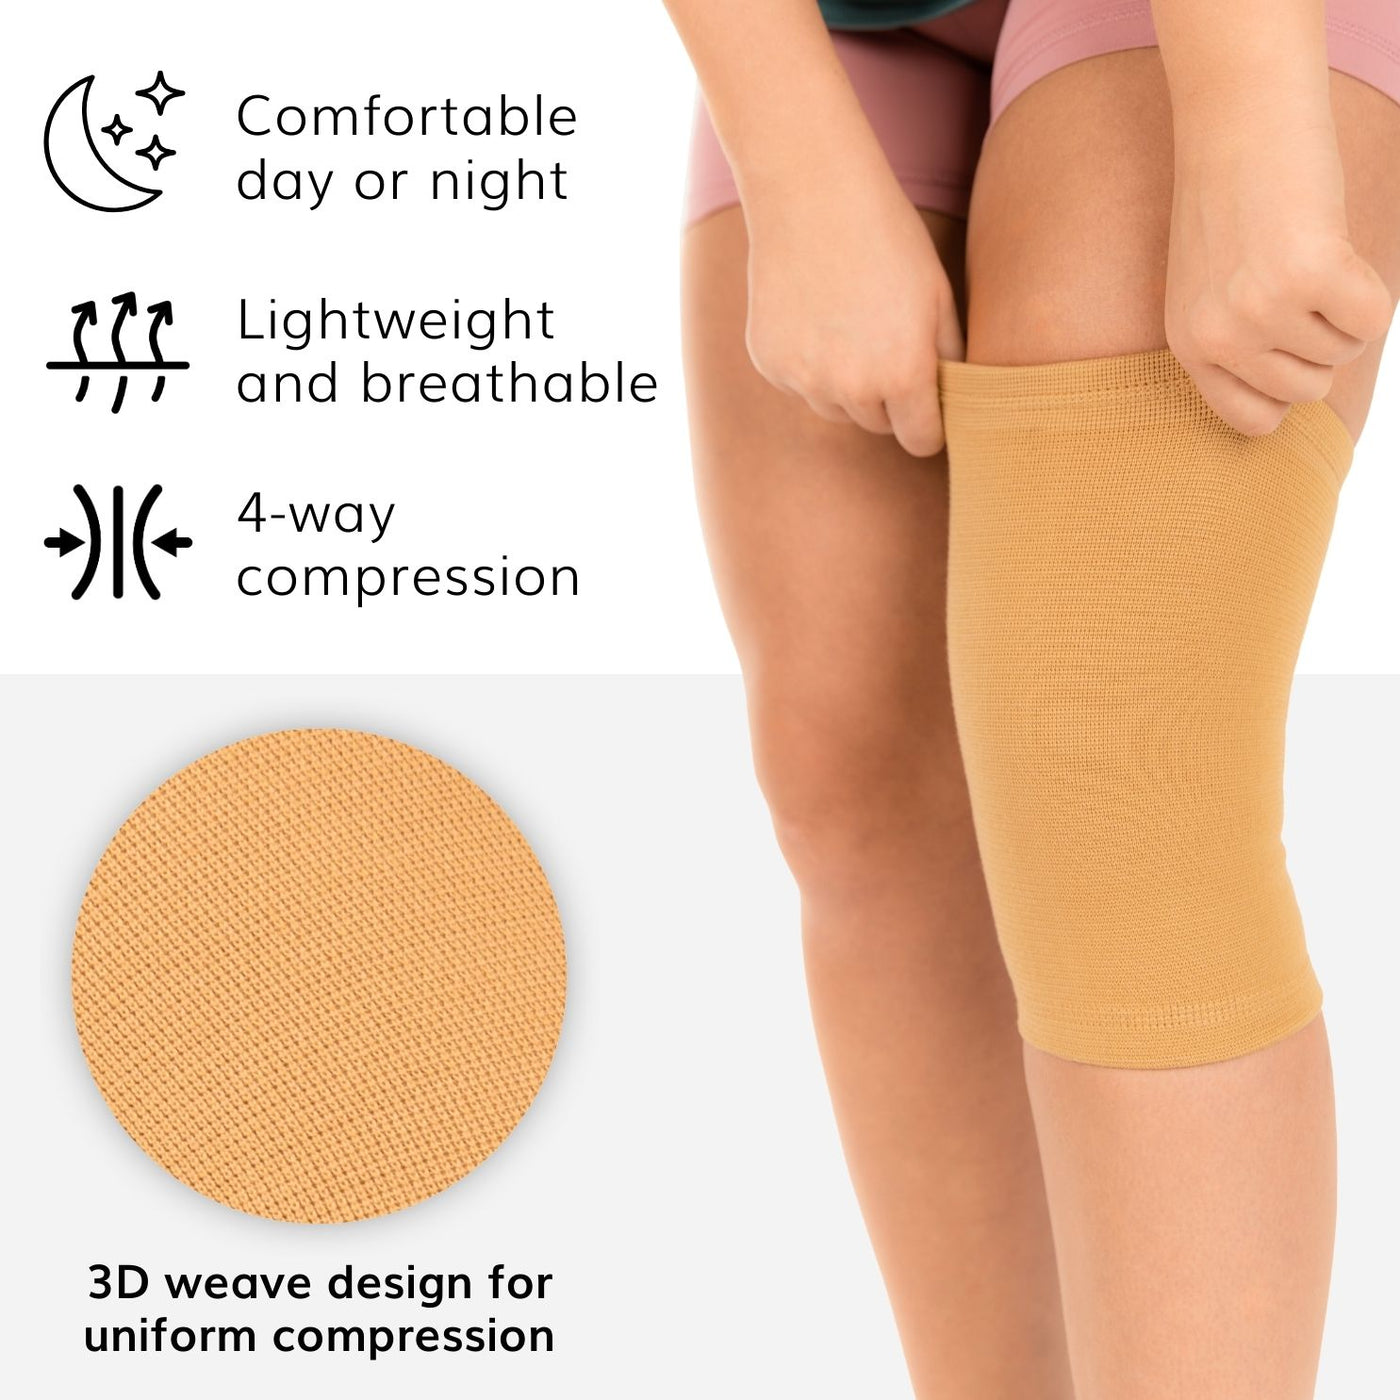 The stretchy knee brace hugs your leg, keeping it in place and evenly compressing your knee and the surrounding area.